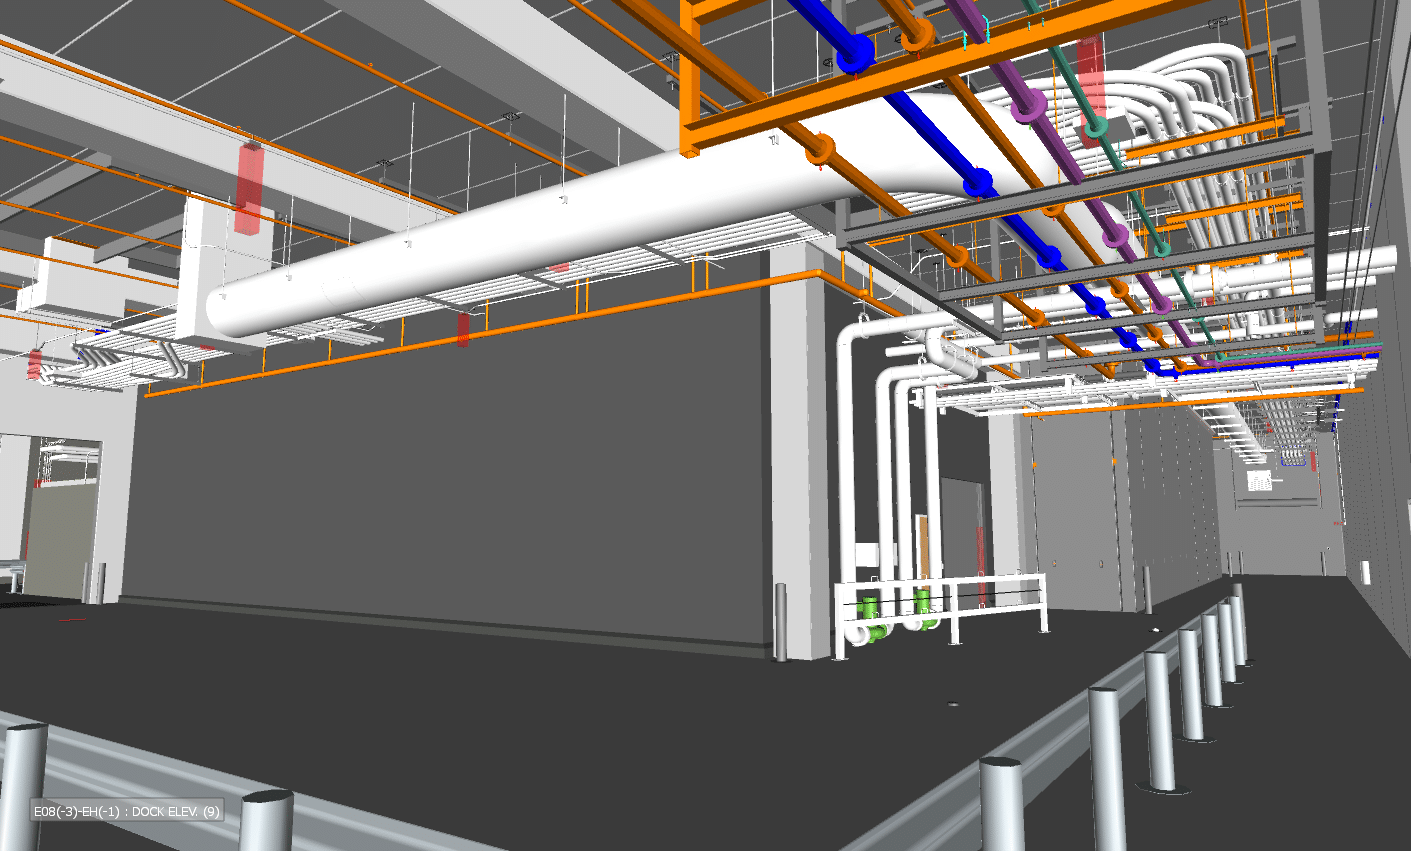 Gray and white digital image of complex overhead pipe and ductwork, represented in orange and blue.